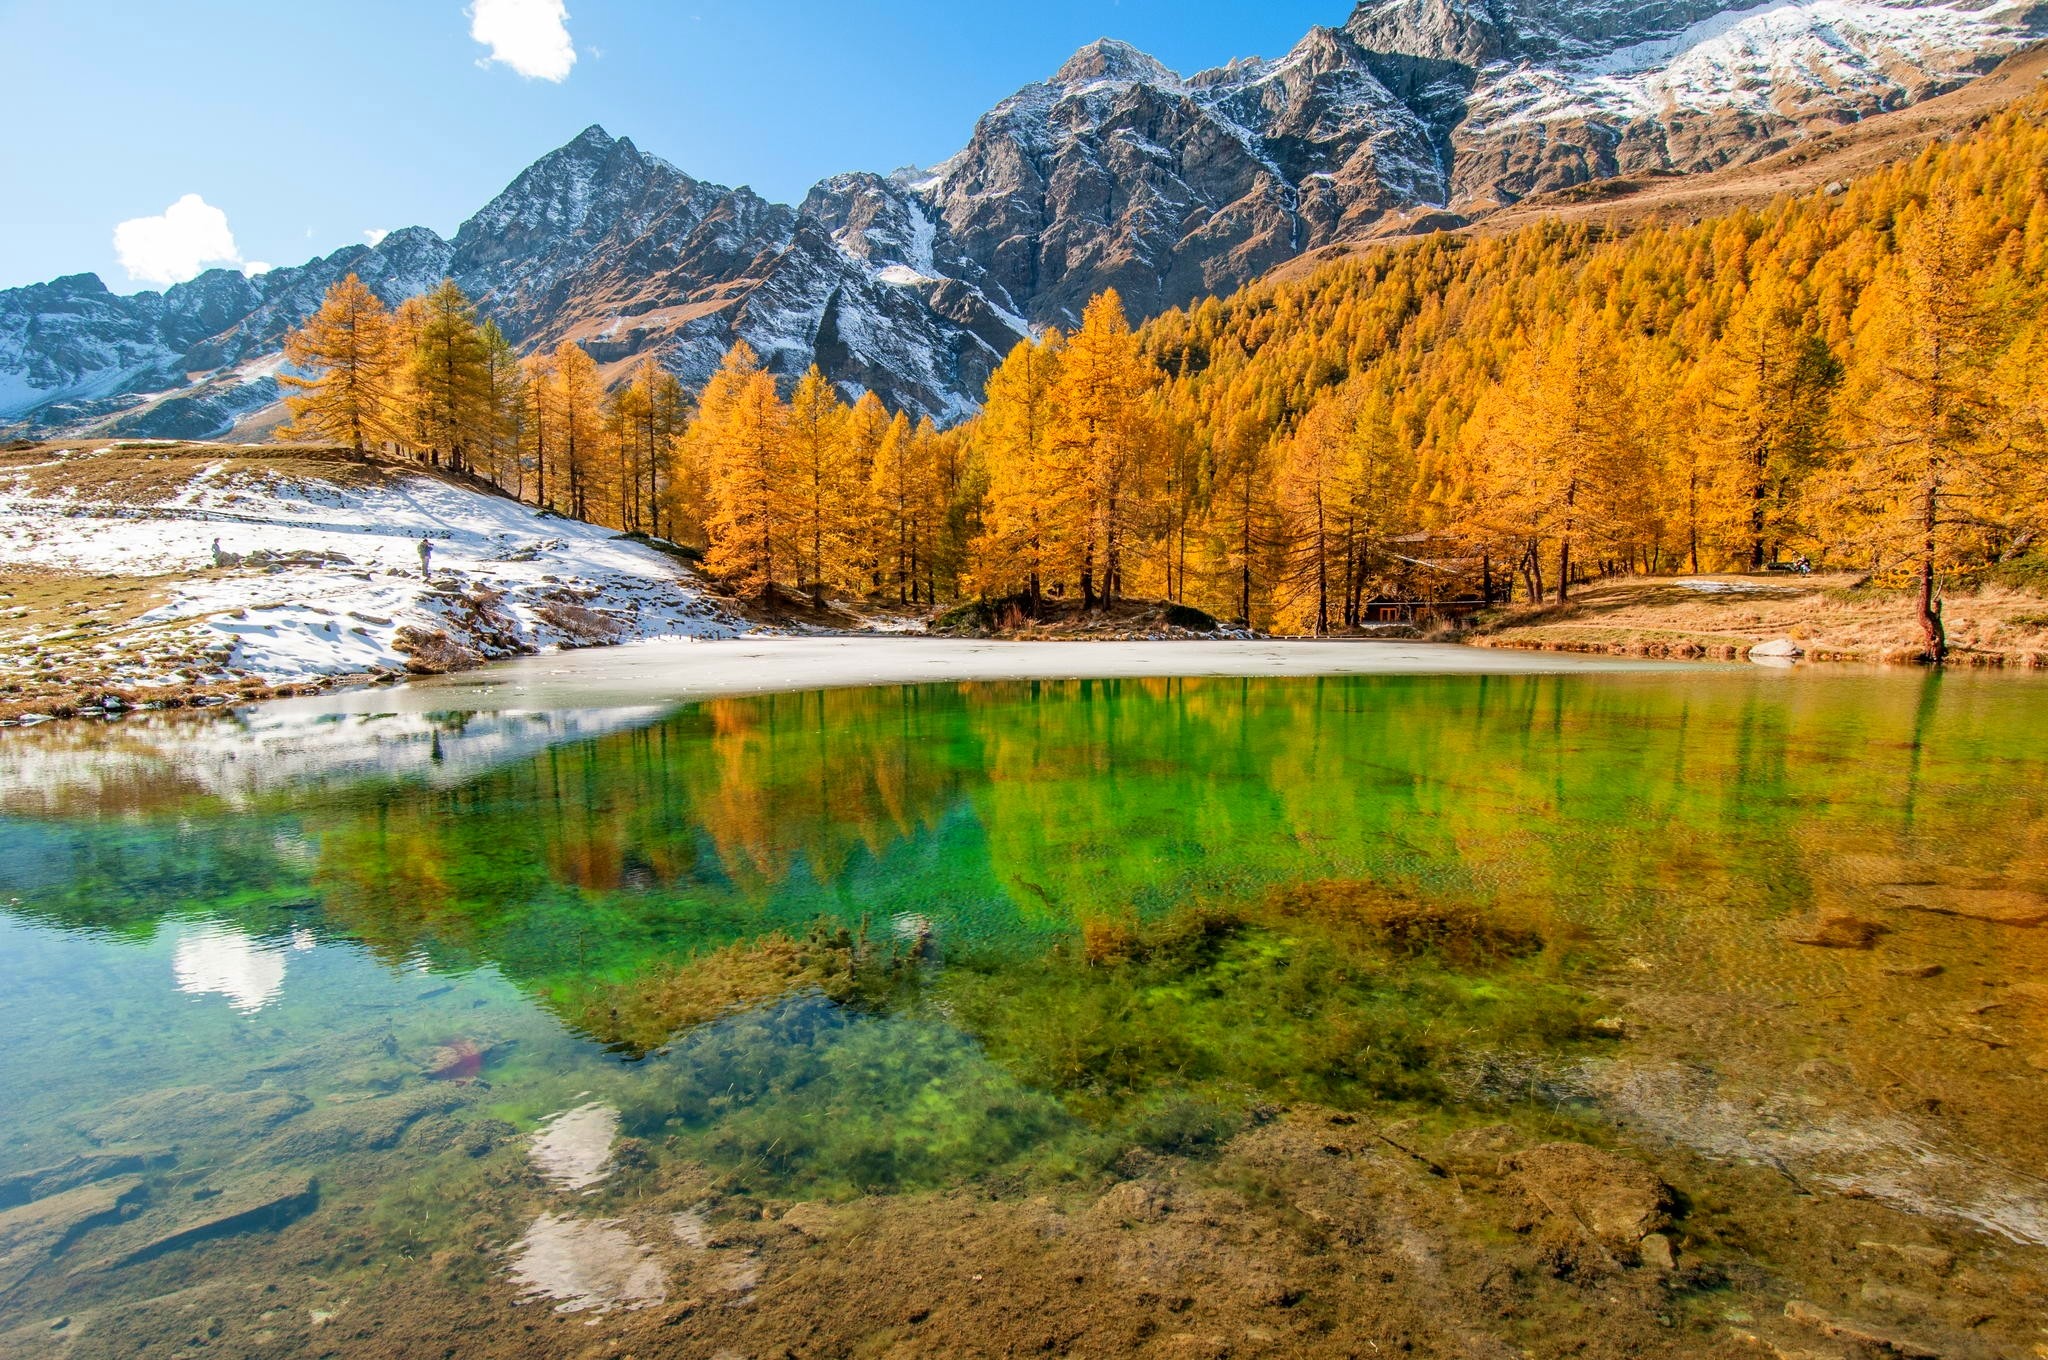 General 2048x1360 landscape nature lake mountains forest fall Italy snow trees snowy peak water gold green reflection